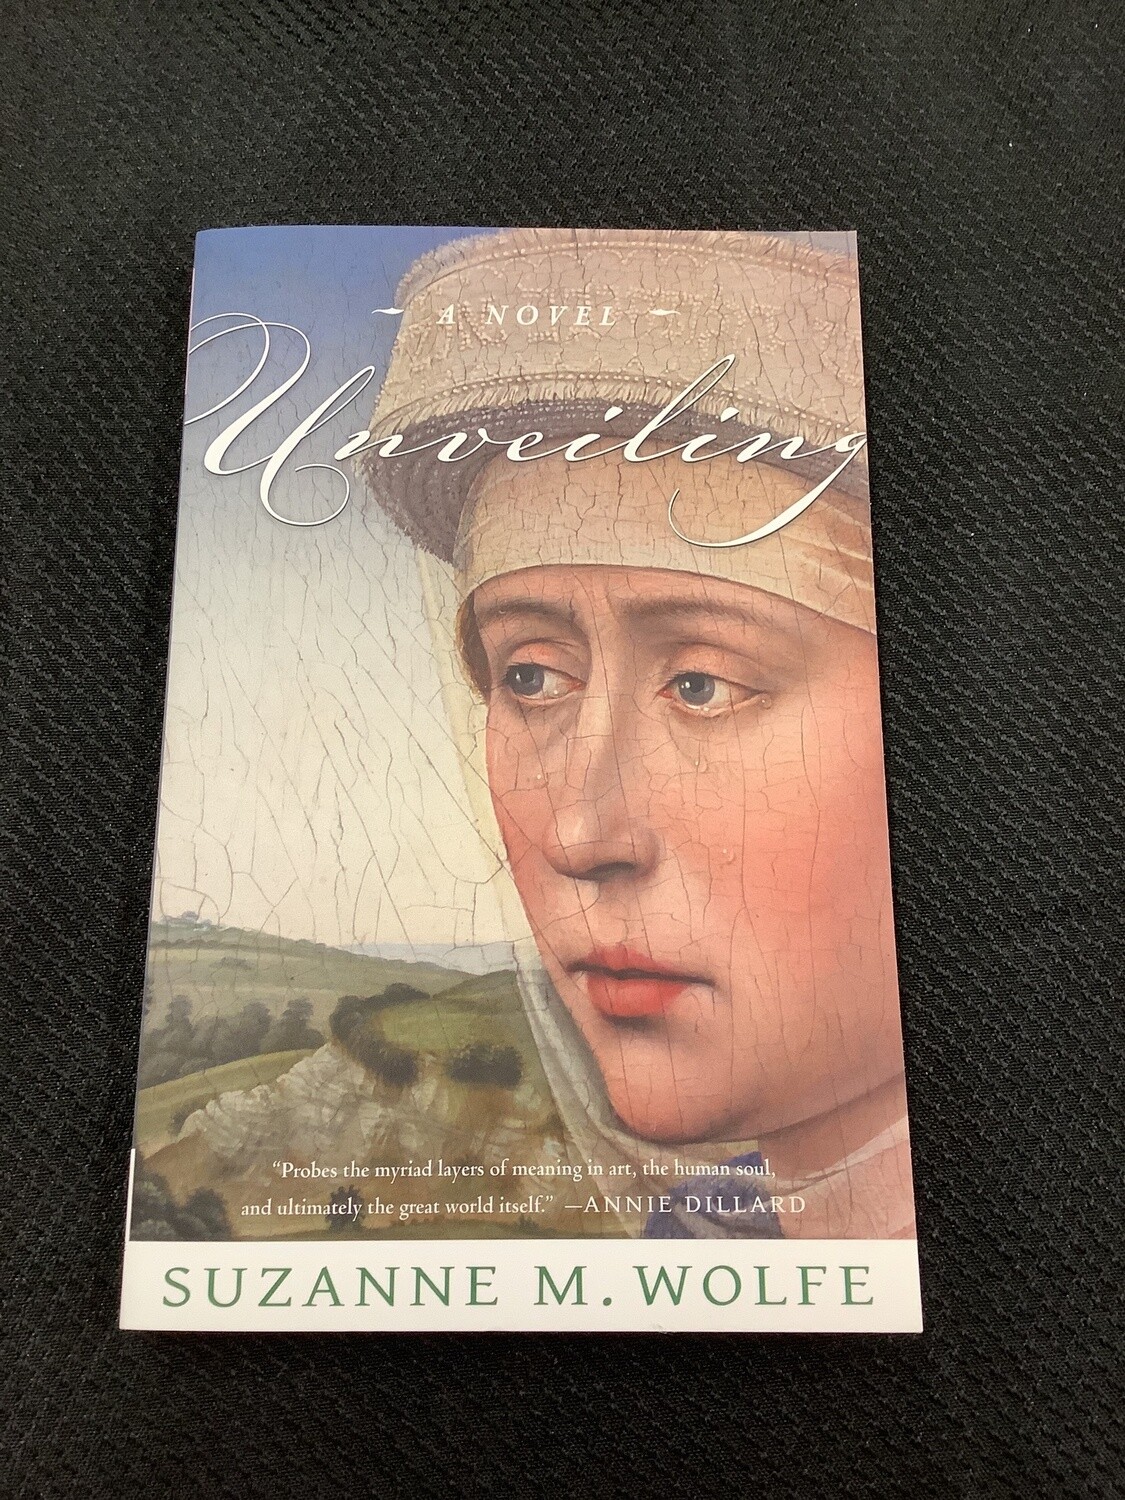 Unveiling - Suzanne M. Wolfe